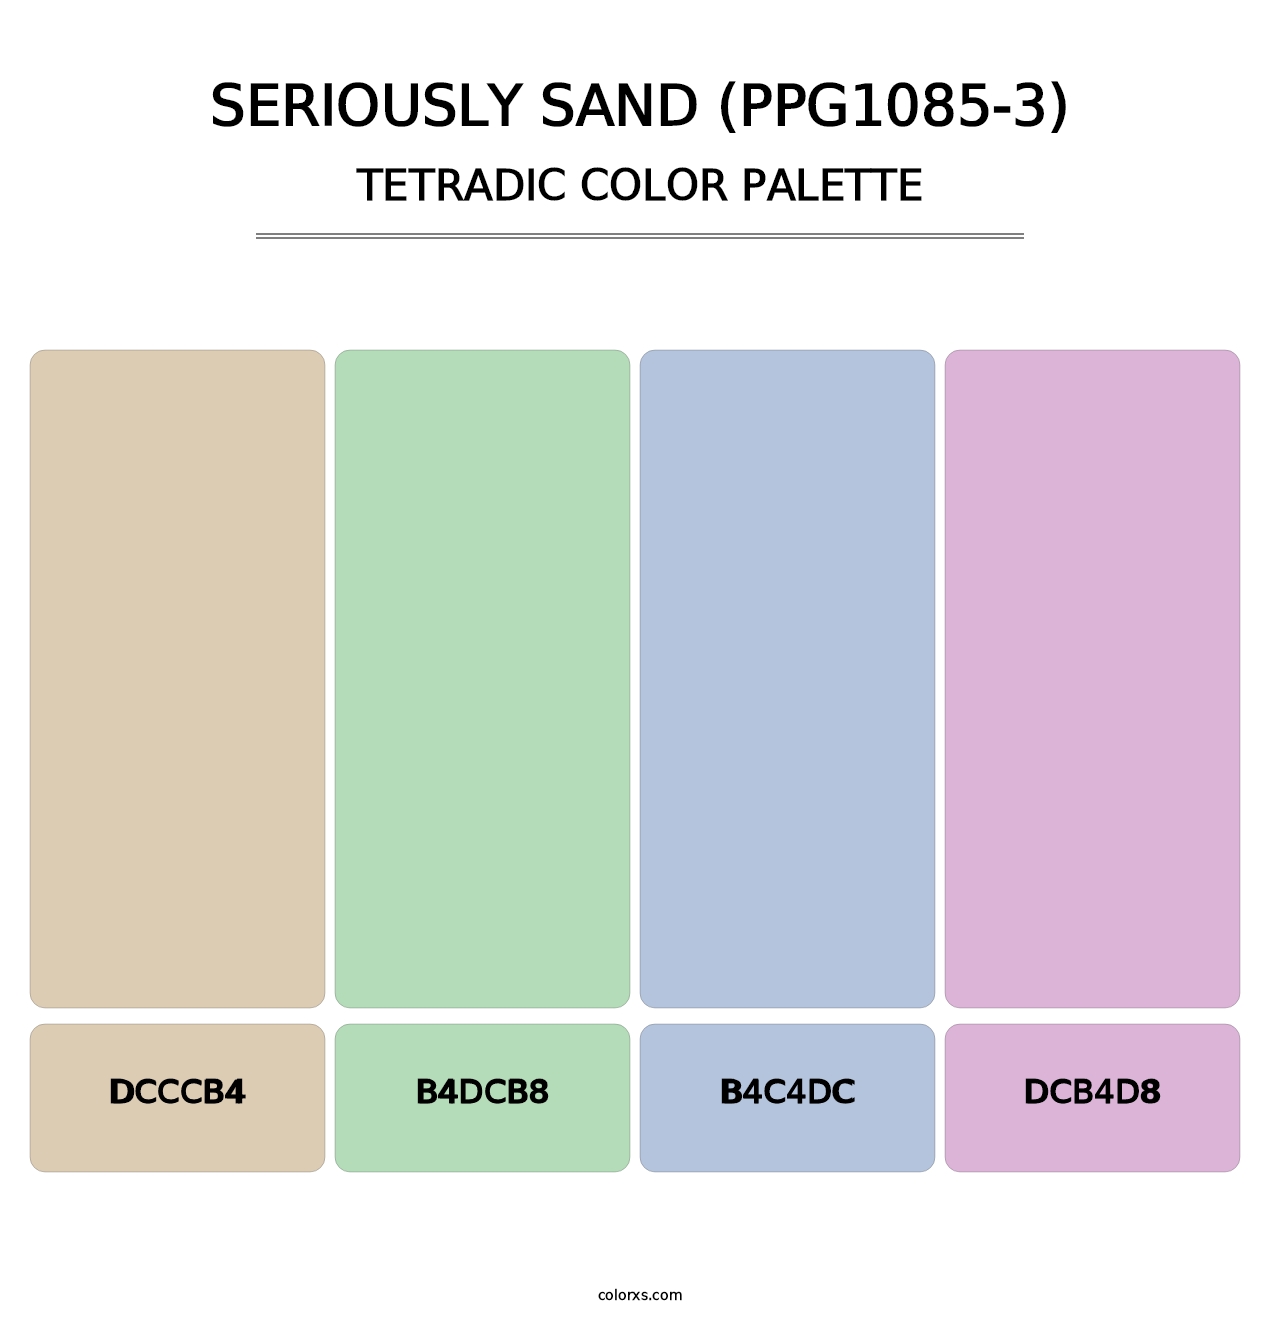 Seriously Sand (PPG1085-3) - Tetradic Color Palette